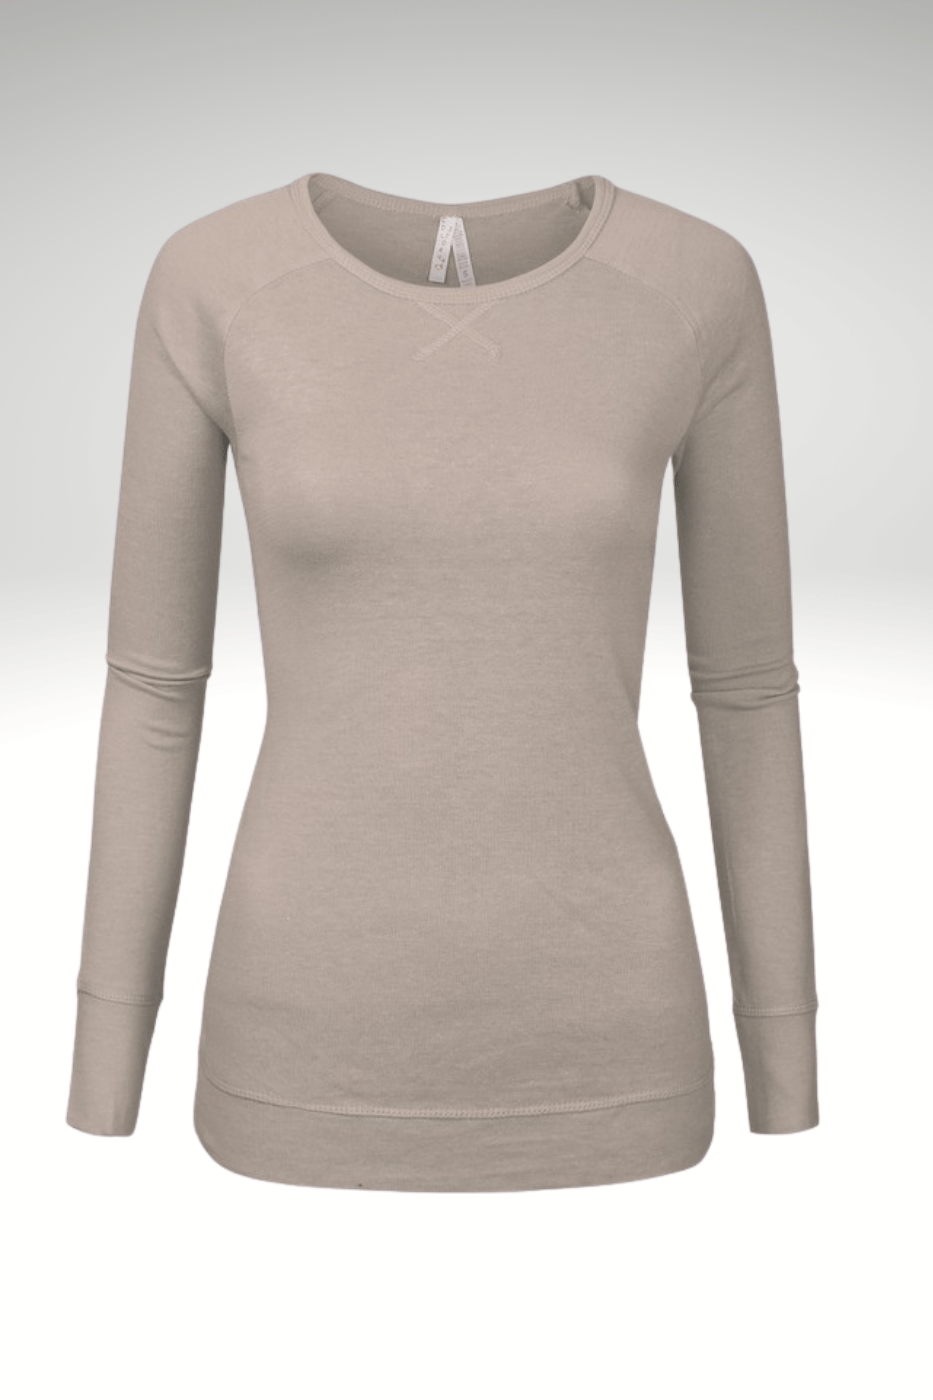 Luxuriance Style Tops The Not So Basic | Sweater Top